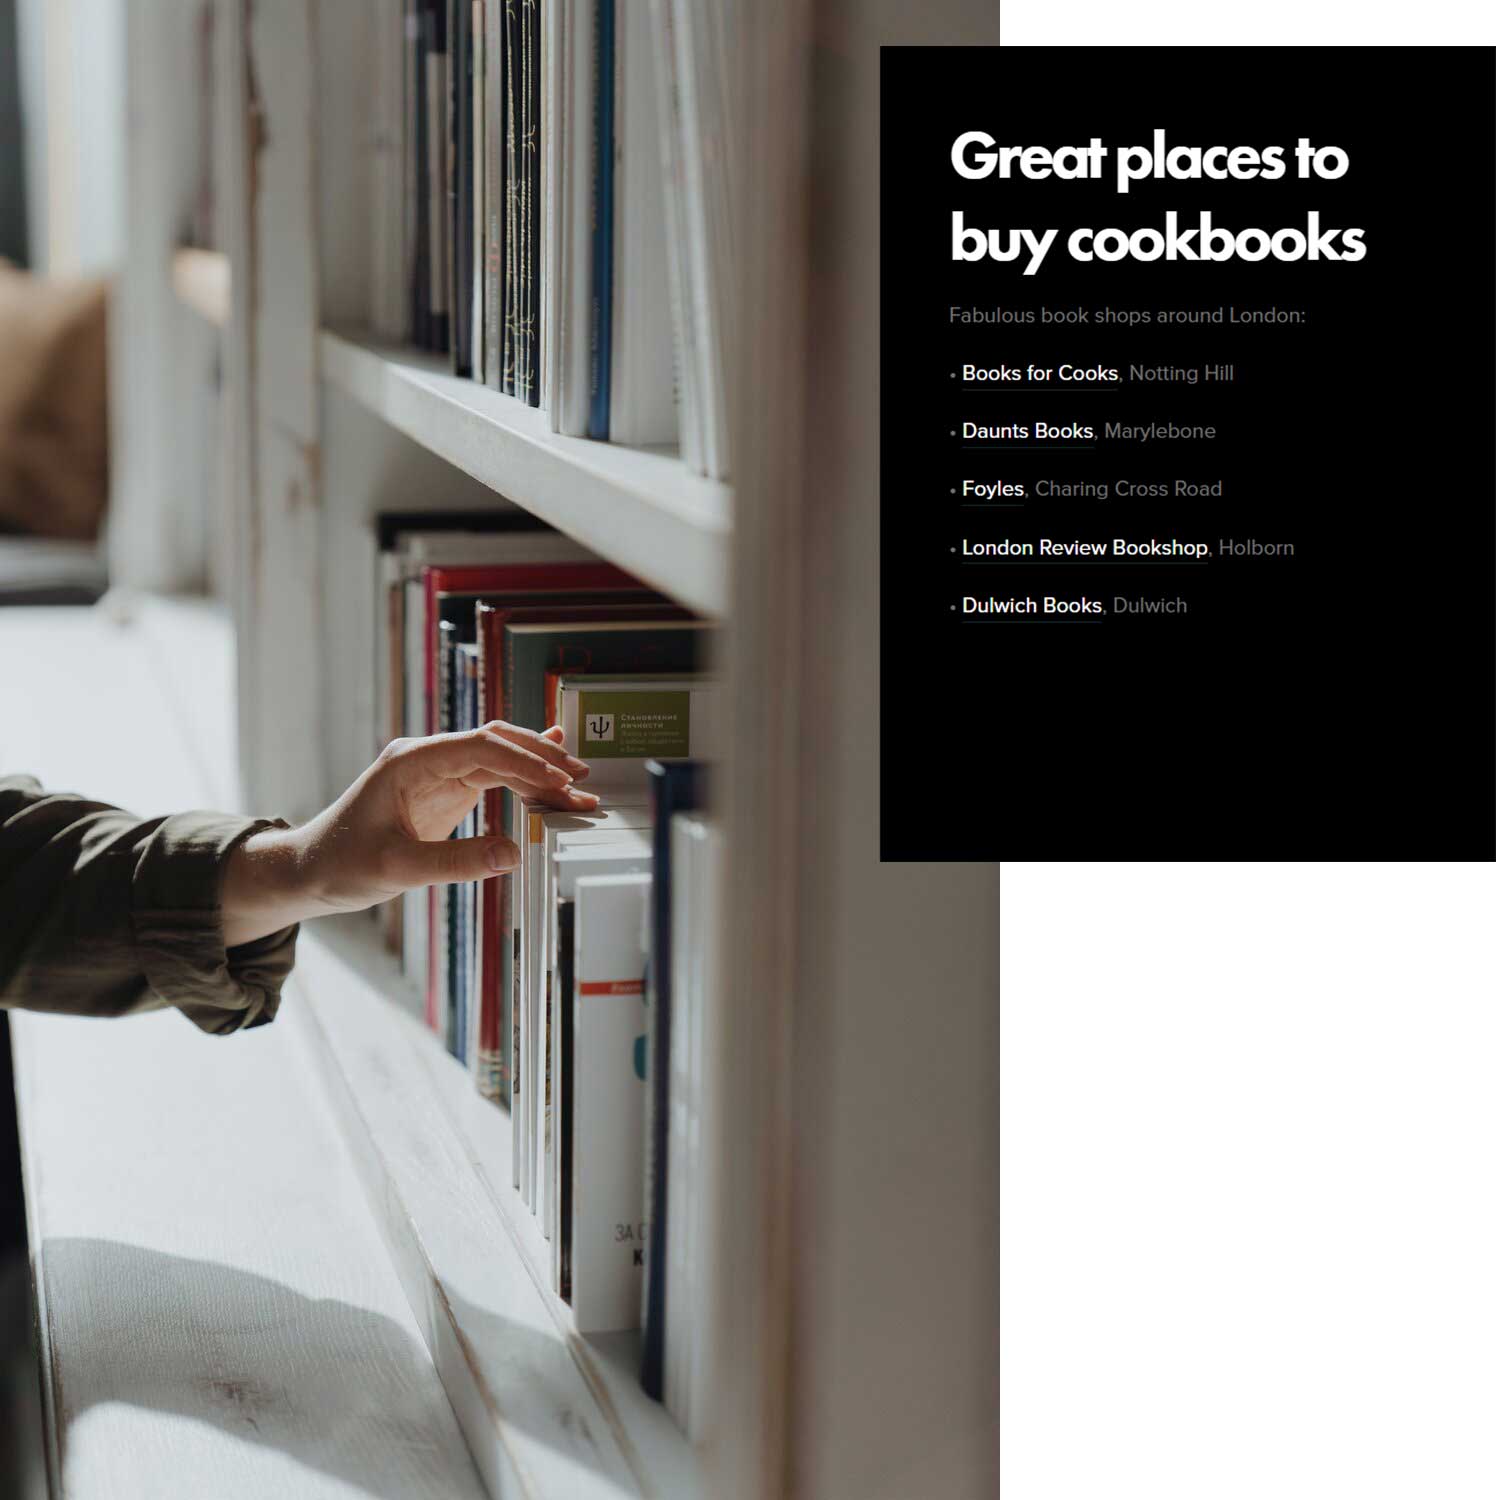 7 classic cookbooks our chefs can’t live without